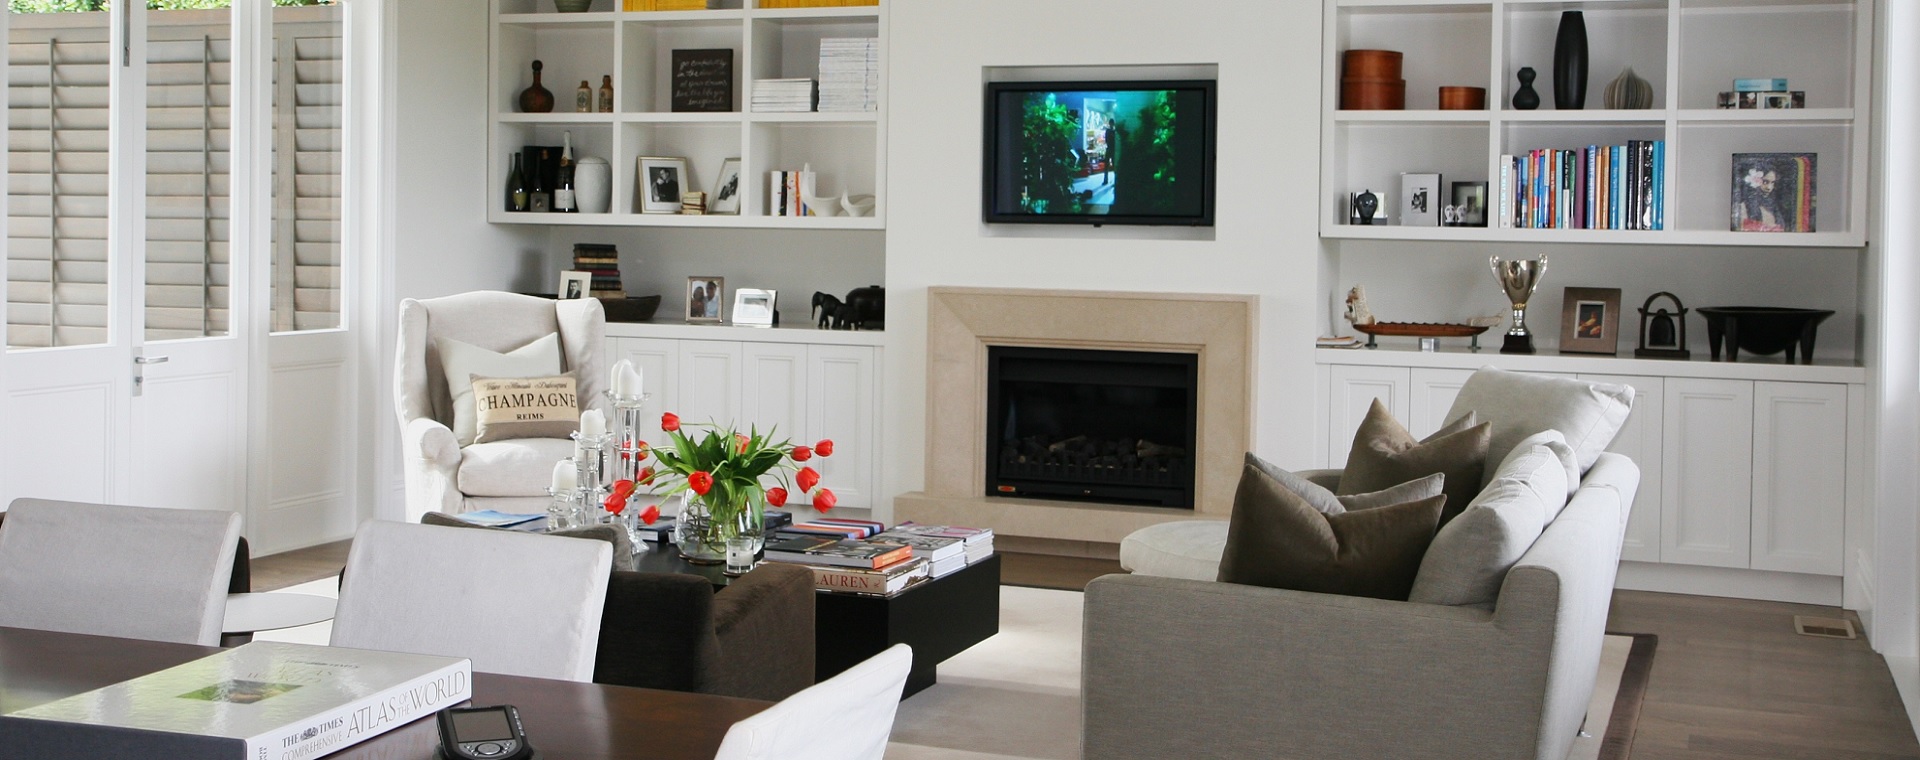 Modern family room with touchscreen control of entertainment system, and recessed TV over fireplace